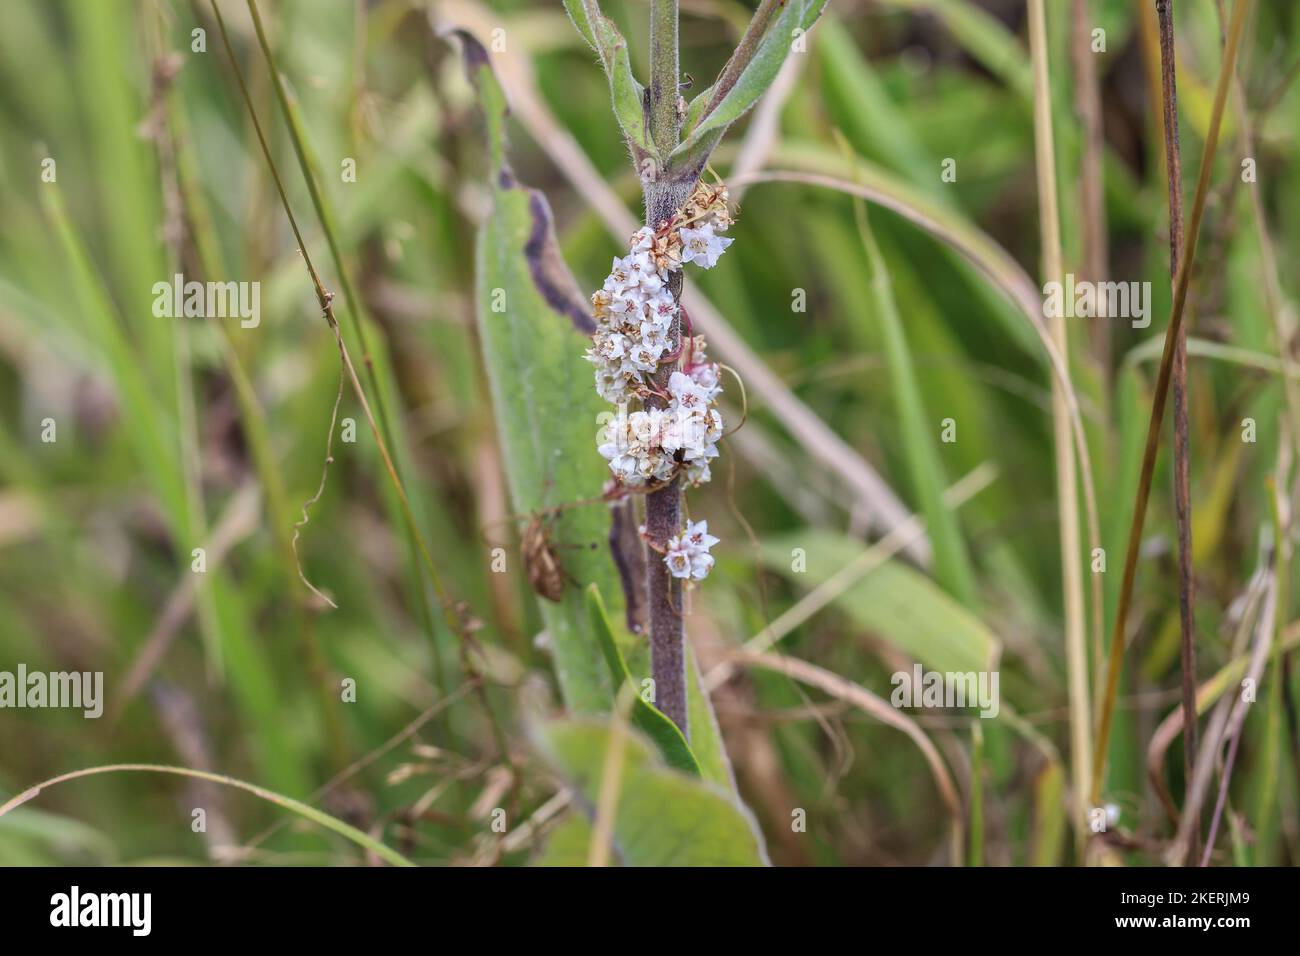 Pale flowers of a parasiti plant amarbel (latin name of genus: Cuscuta) in a meadow in Montenegro Stock Photo